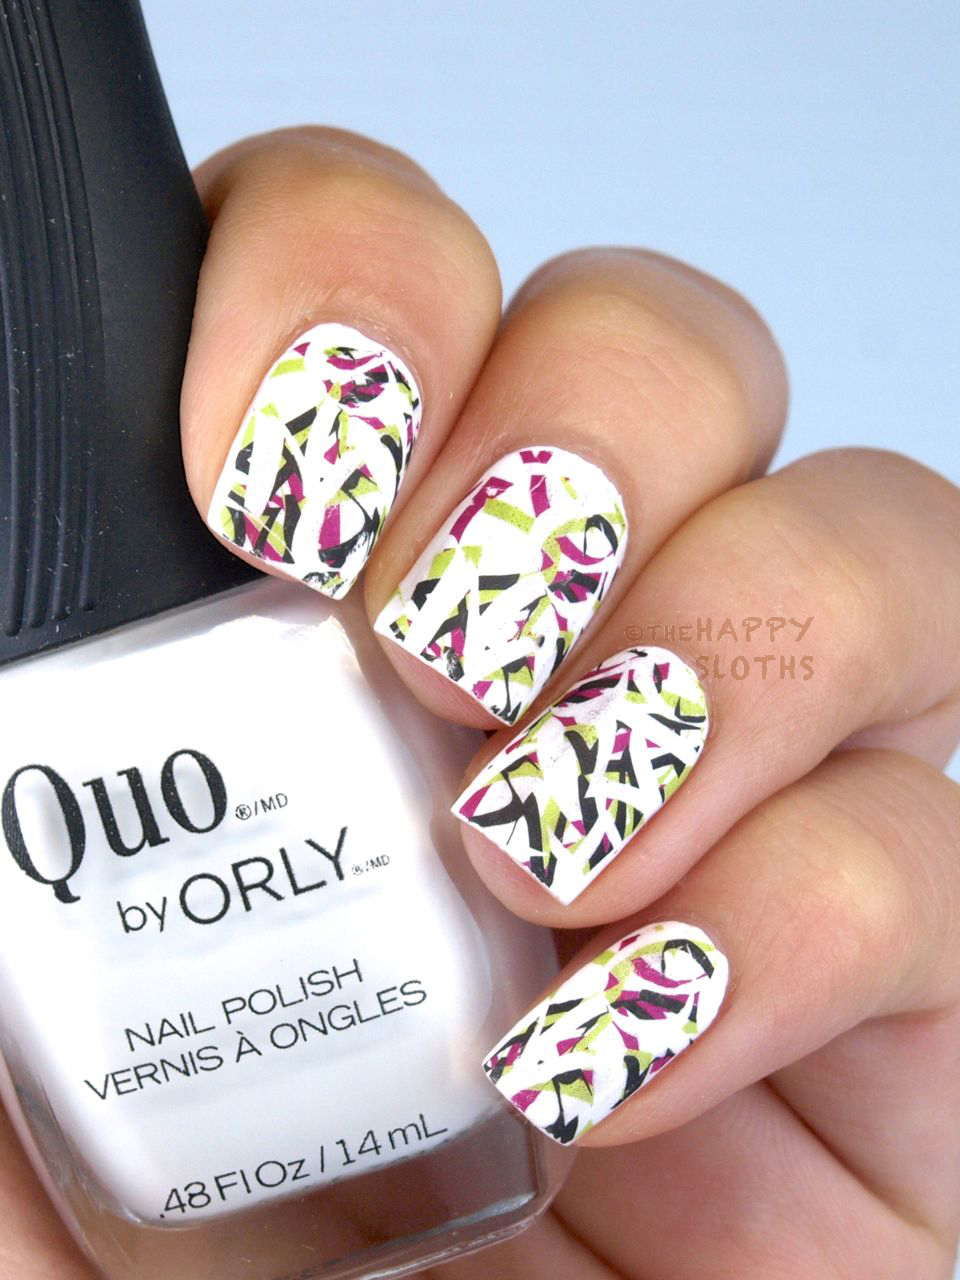 Quo by Orly Water Transfer Nail Art in "Mischief": Review and Swatches